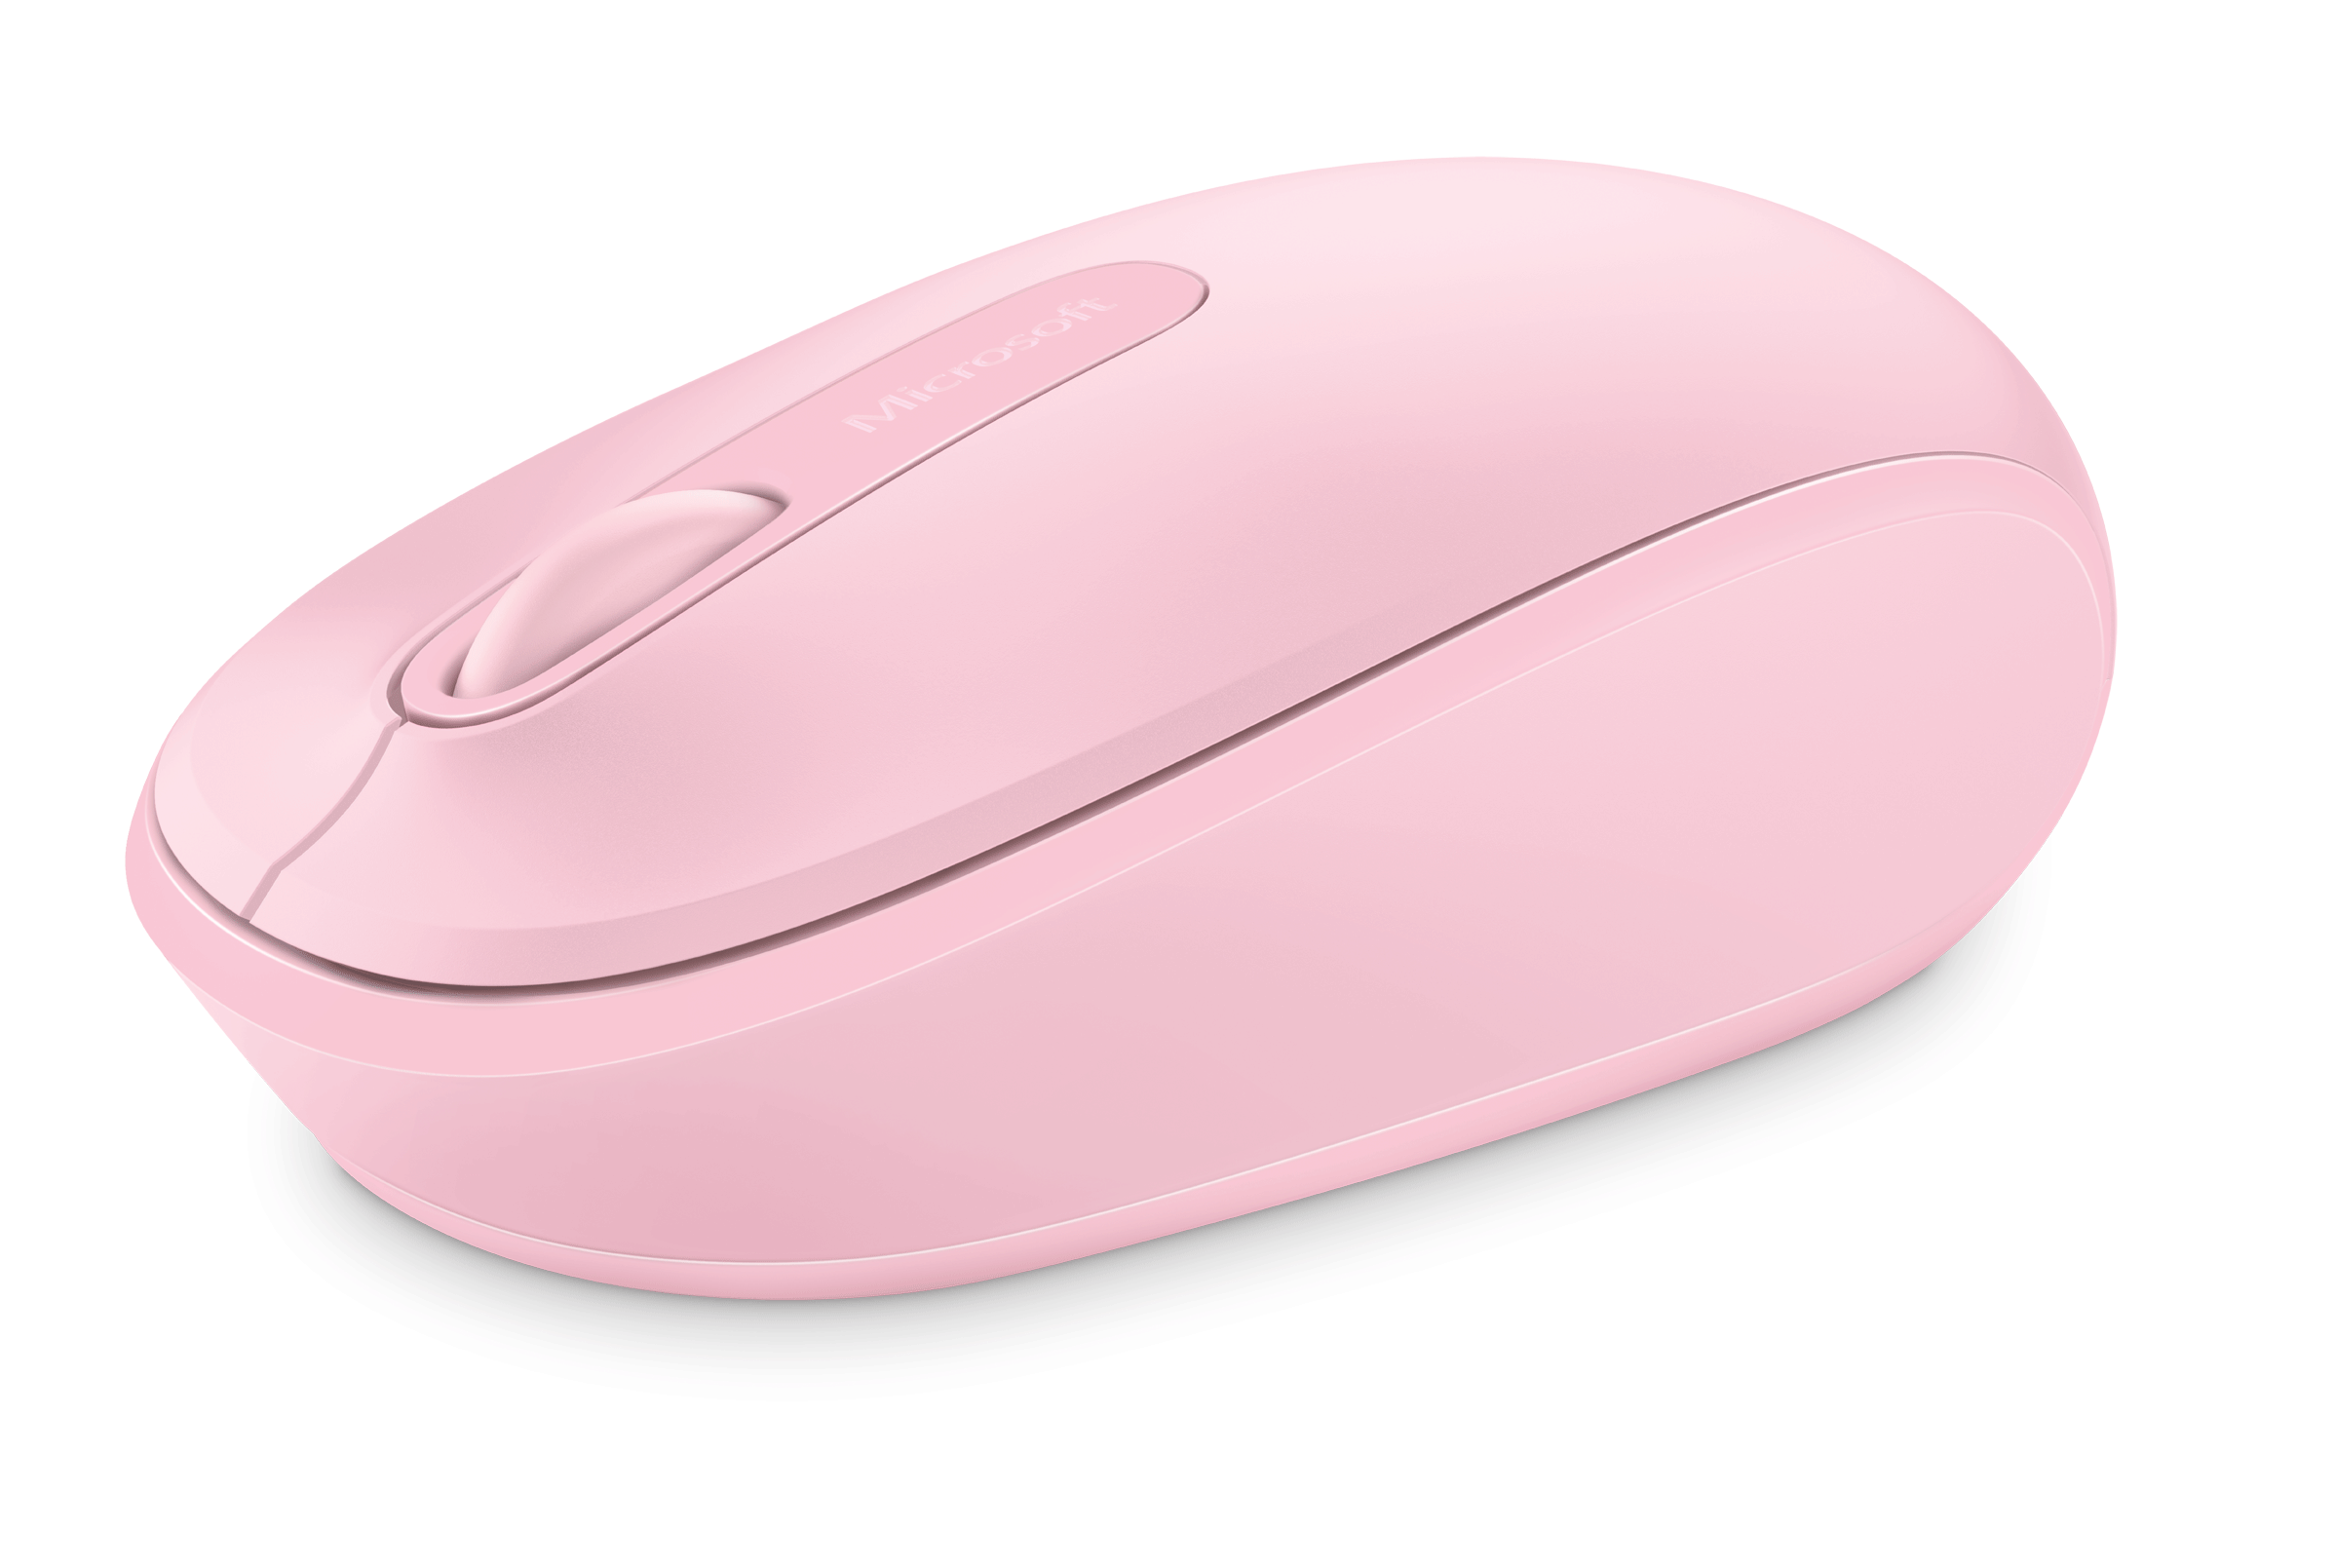 Microsoft Wireless Mobile Mouse 1850 – Light Orchid